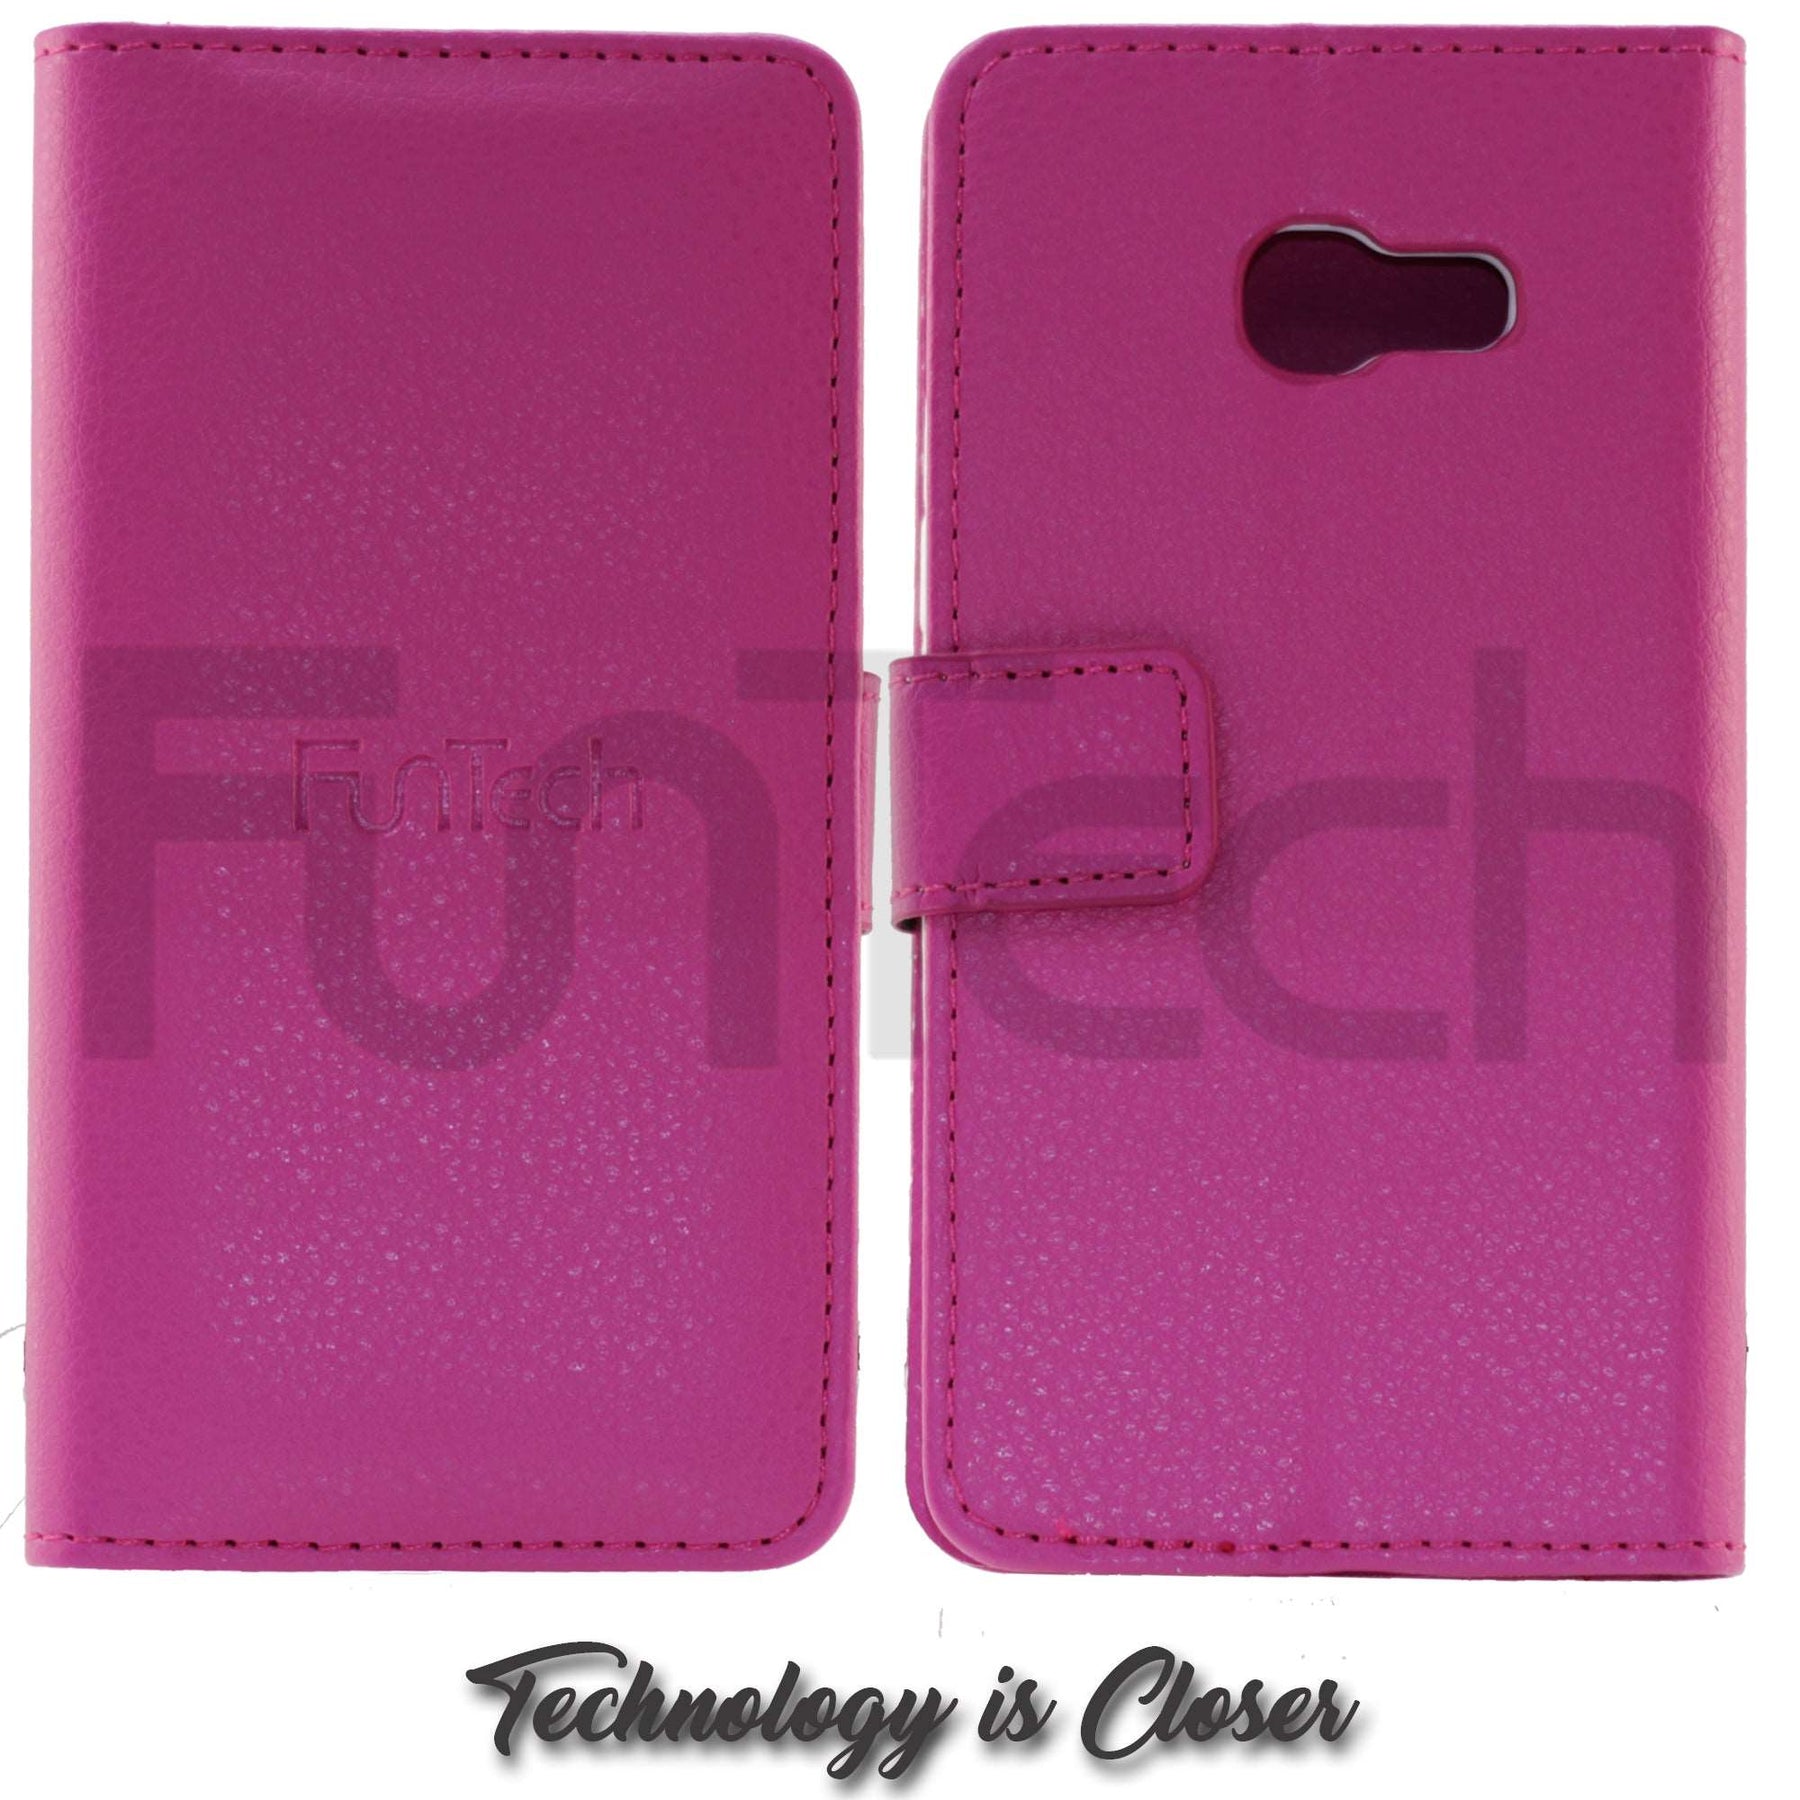 Samsung A3 2017, Leather Wallet Case, Color Pink.